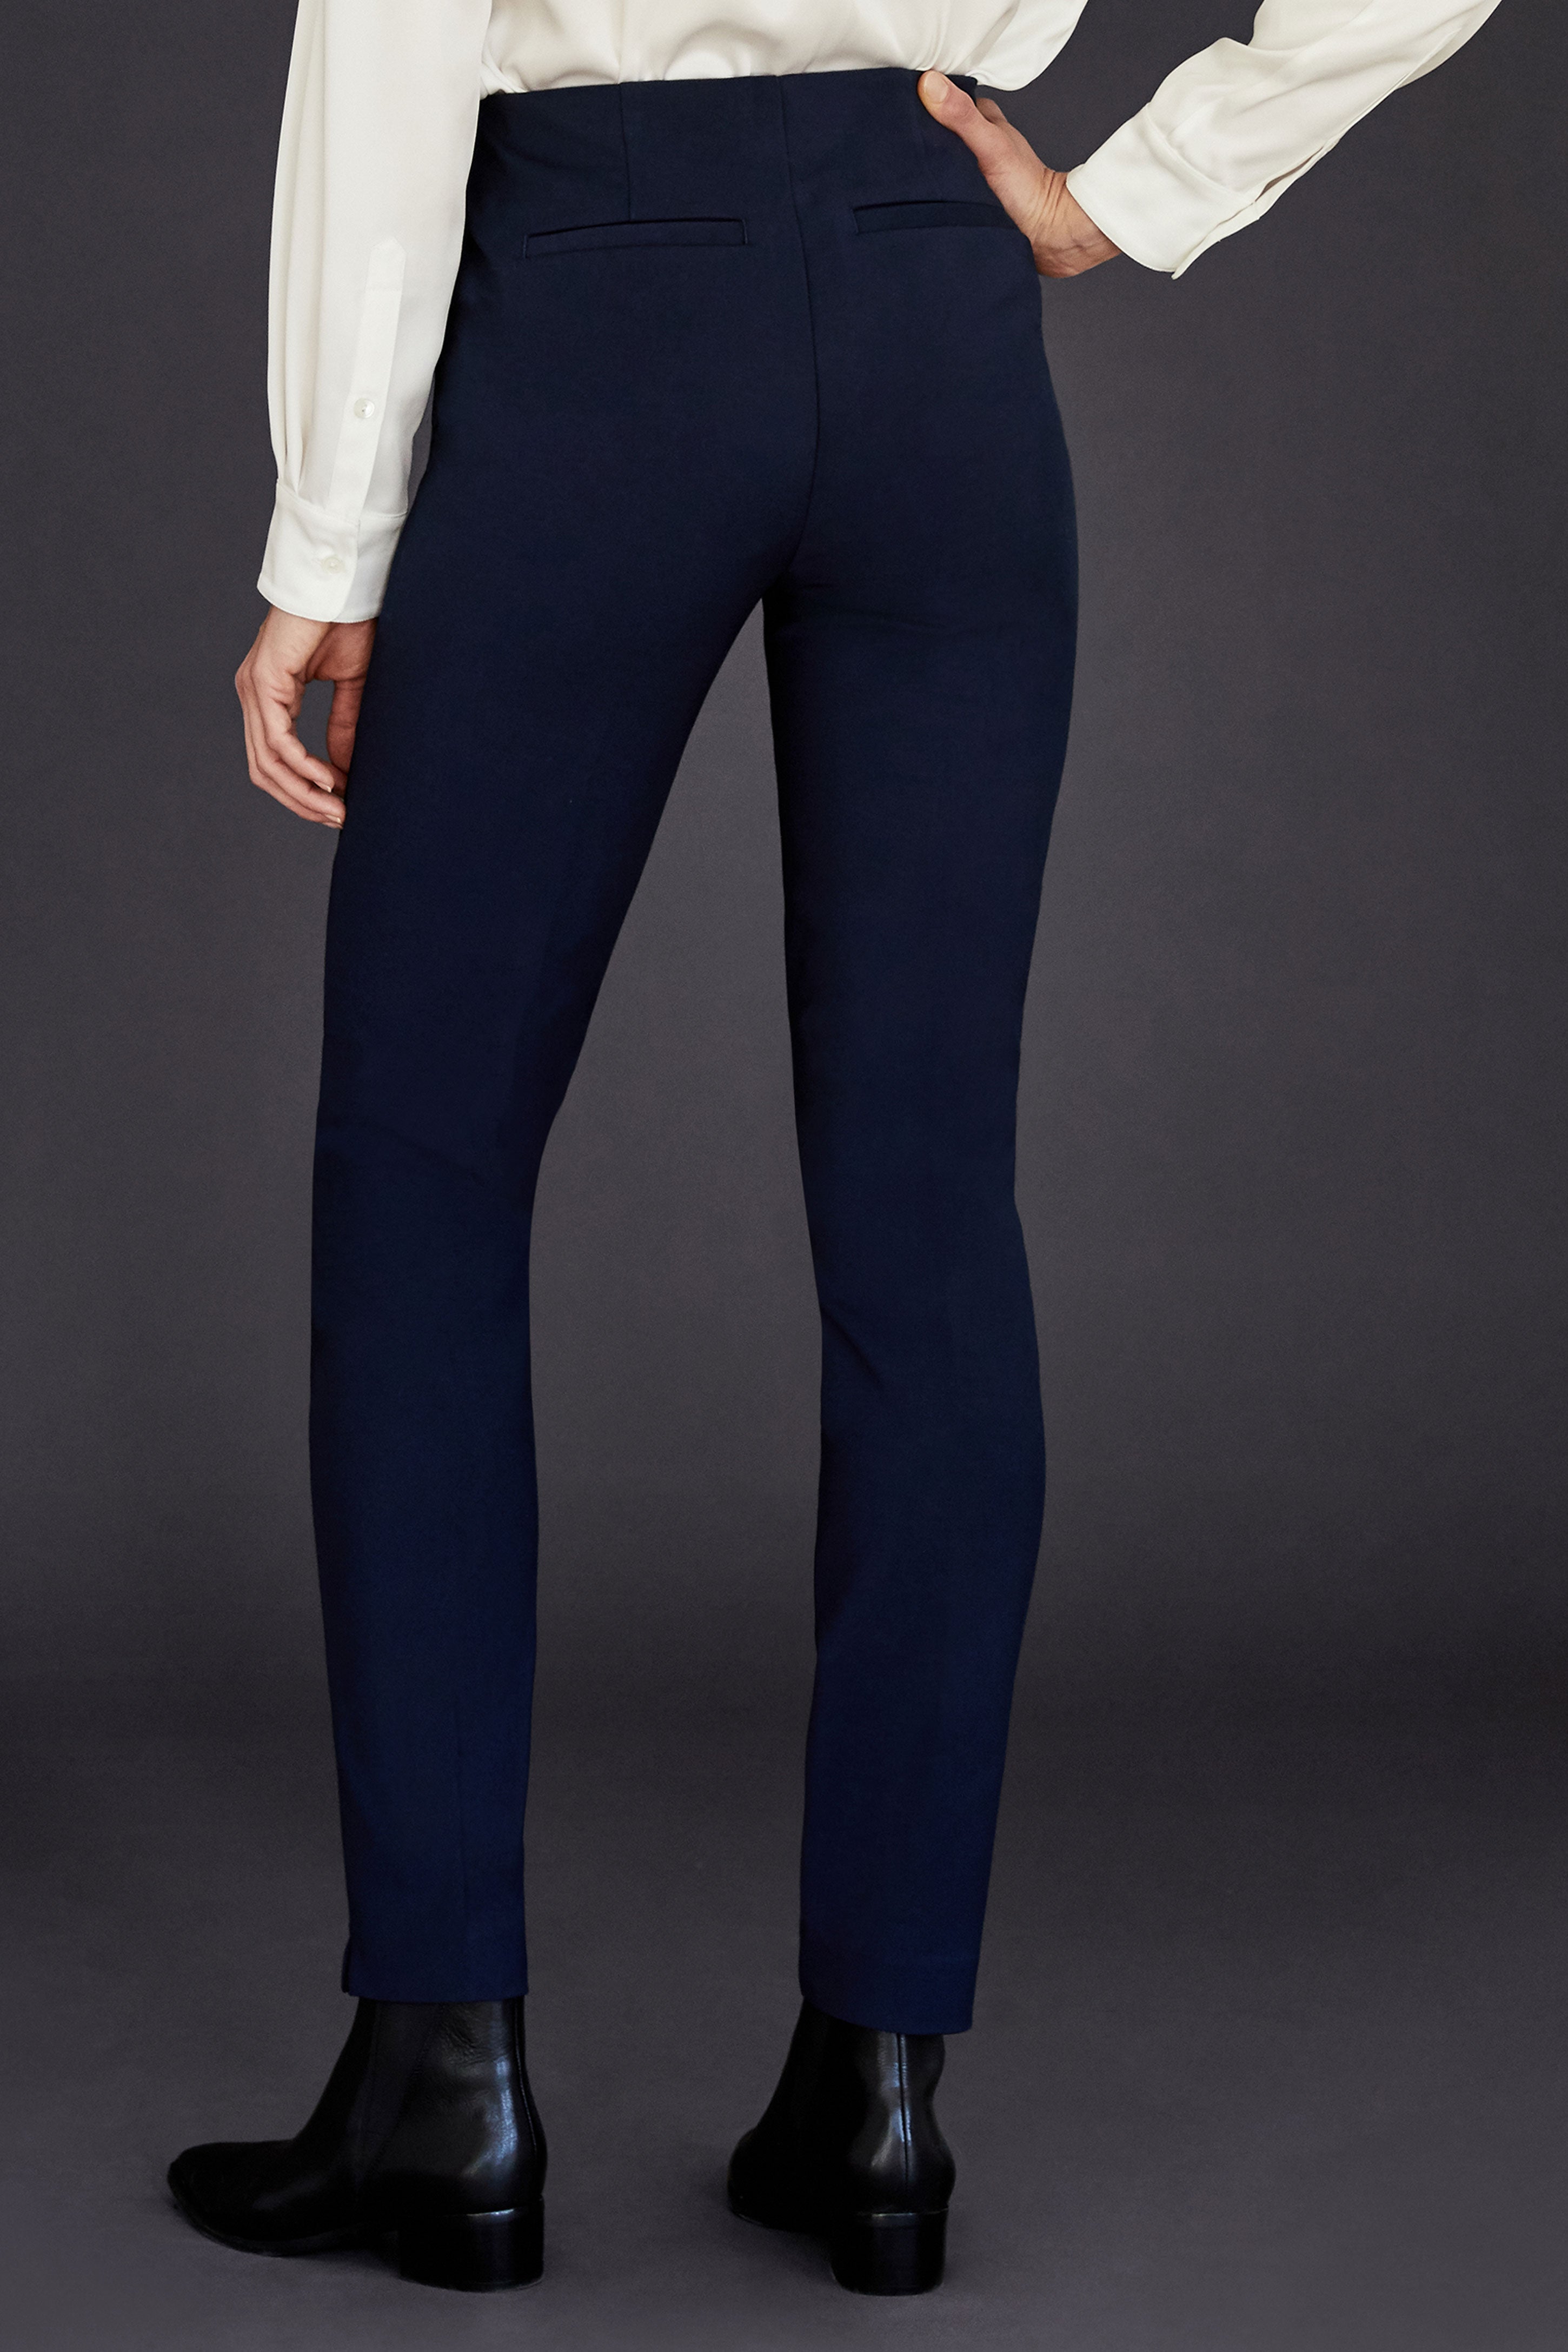 Springfield Tribeca Stretch Classic Pull On Pant